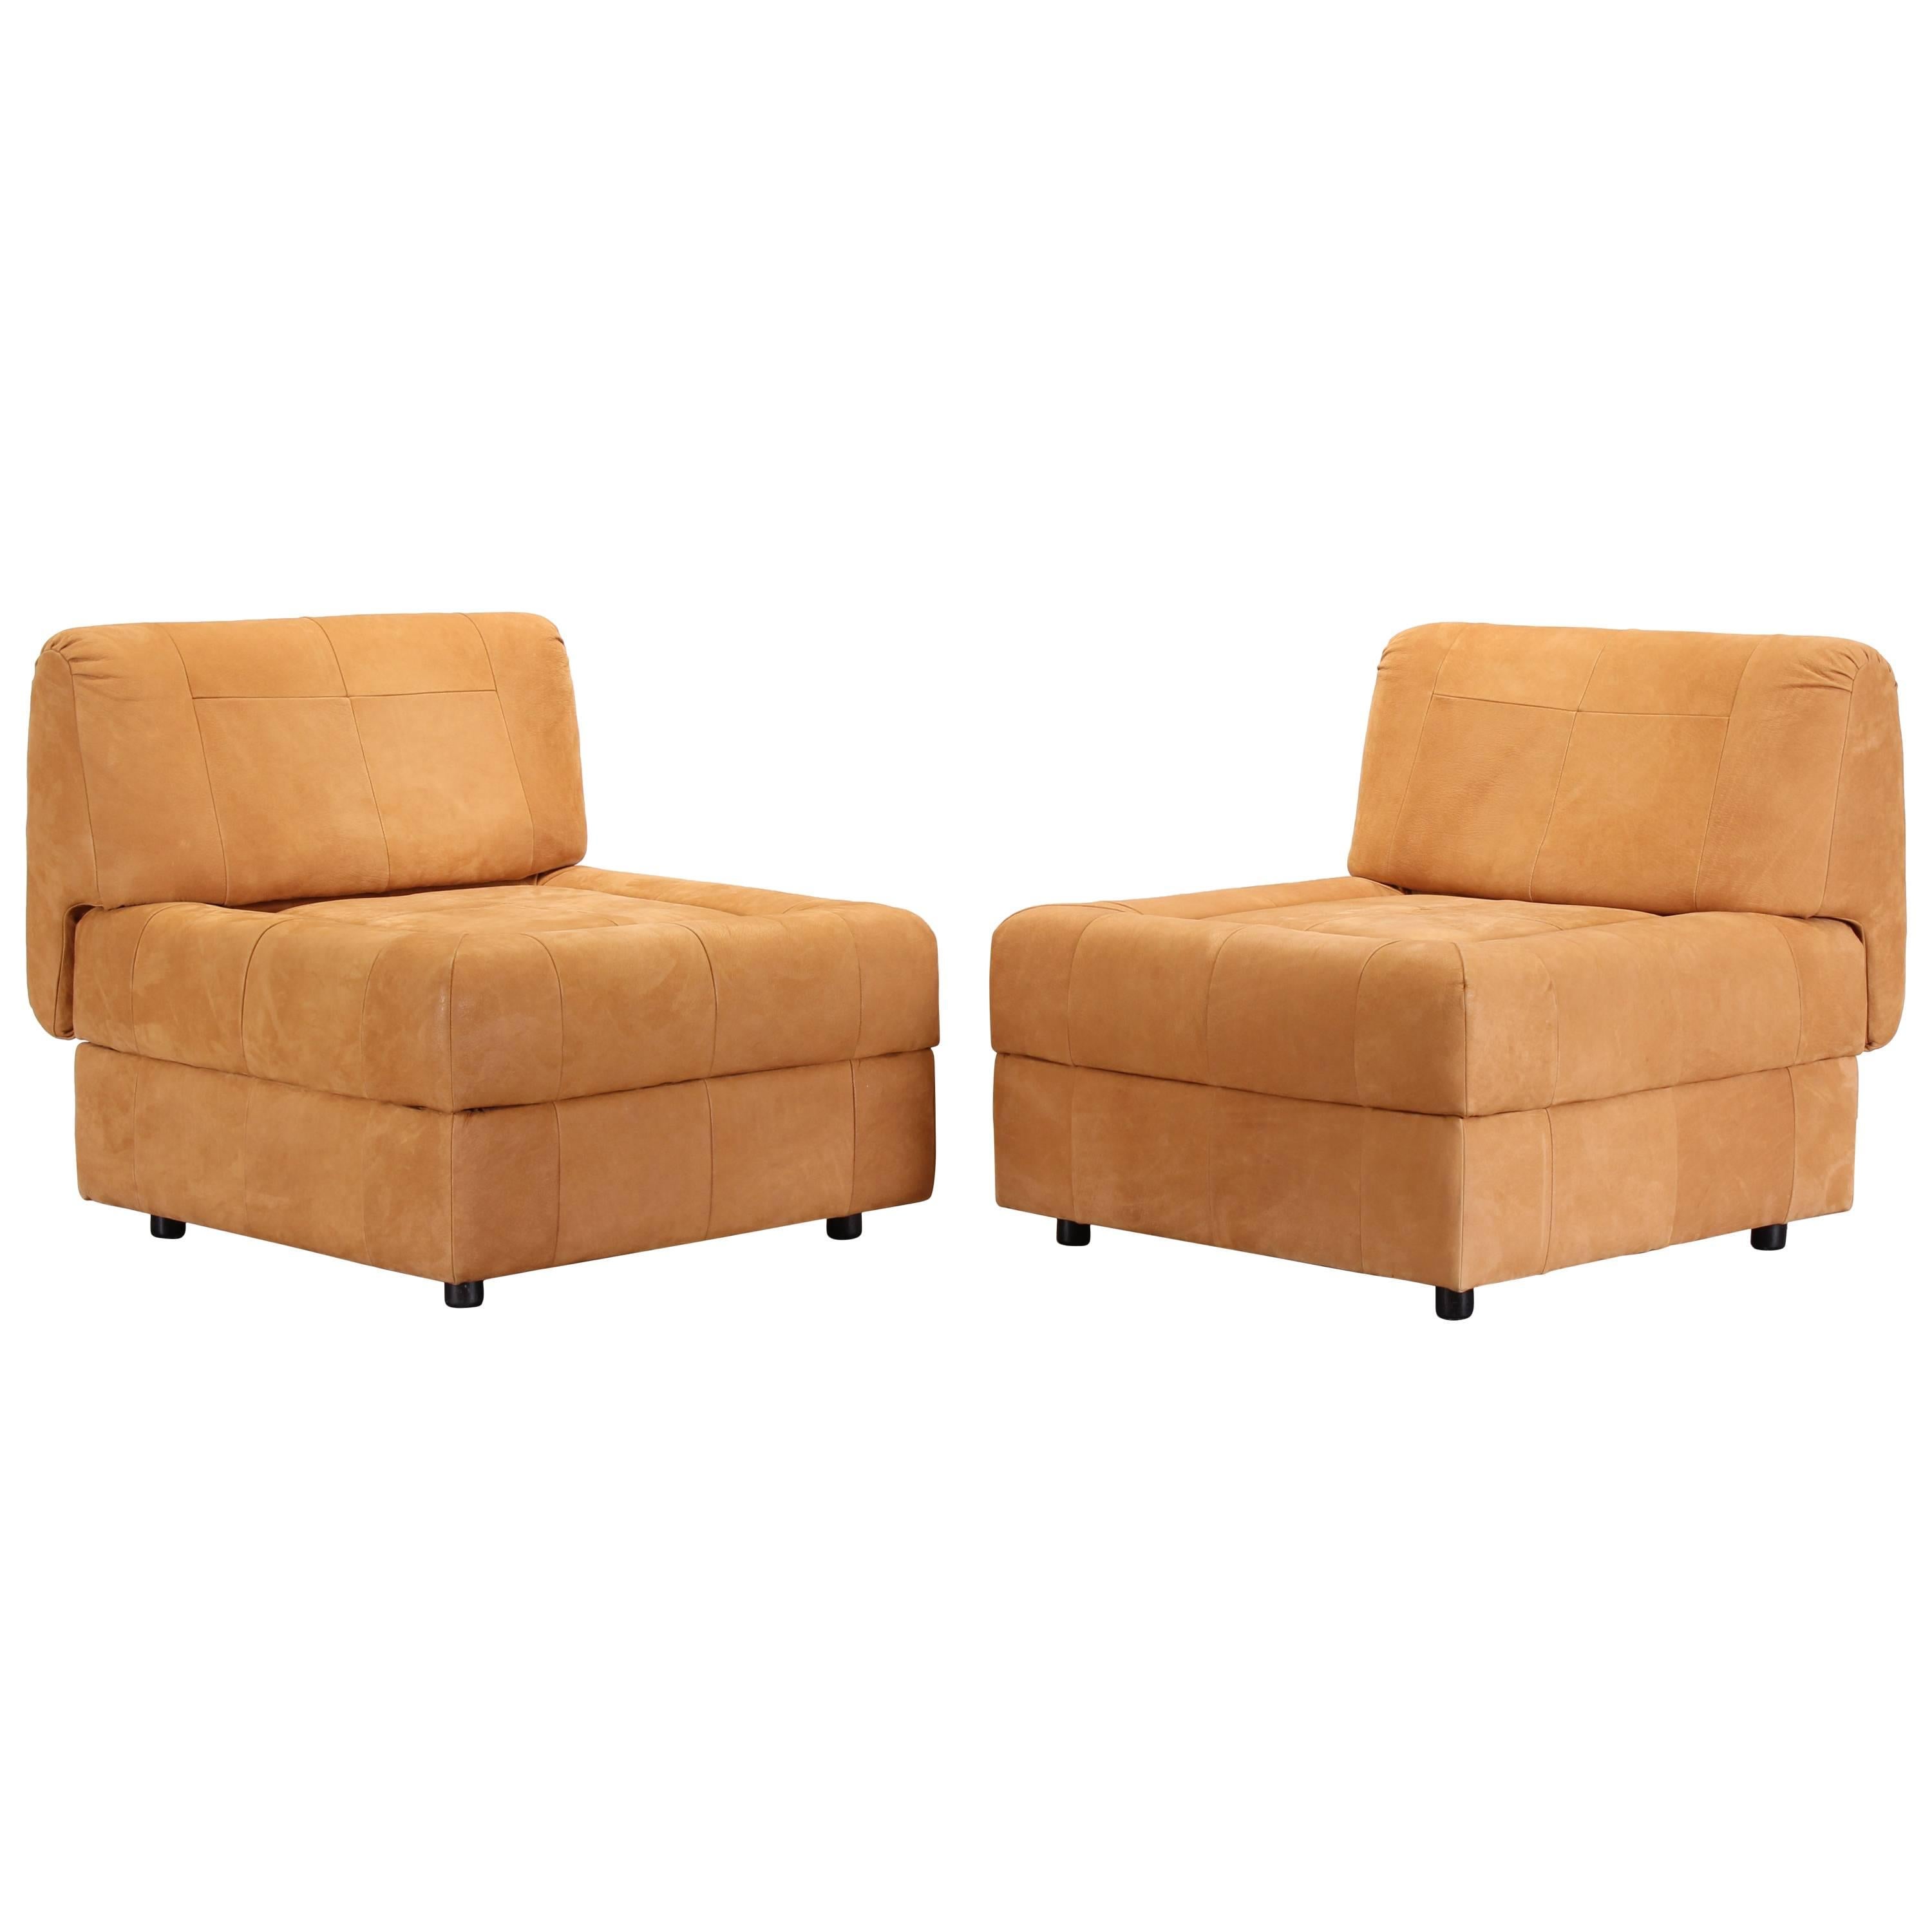 Pair of Suede Leather Lounge Chairs by Lafer, 1970